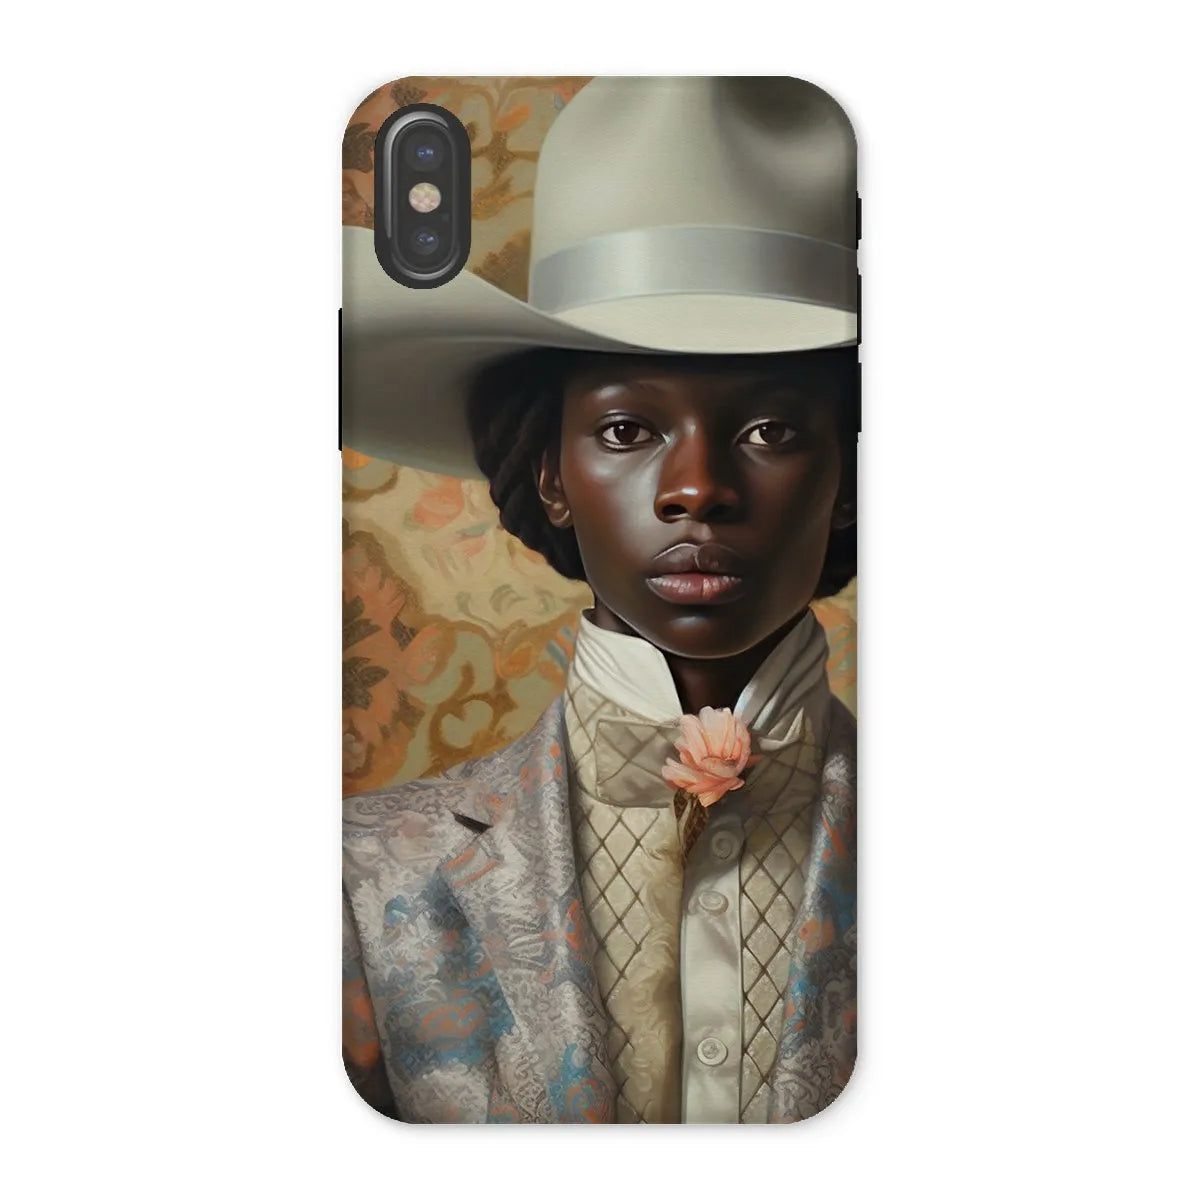 Caesar The Gay Cowboy - Gay Aesthetic Art Phone Case - Iphone x / Matte - Mobile Phone Cases - Aesthetic Art